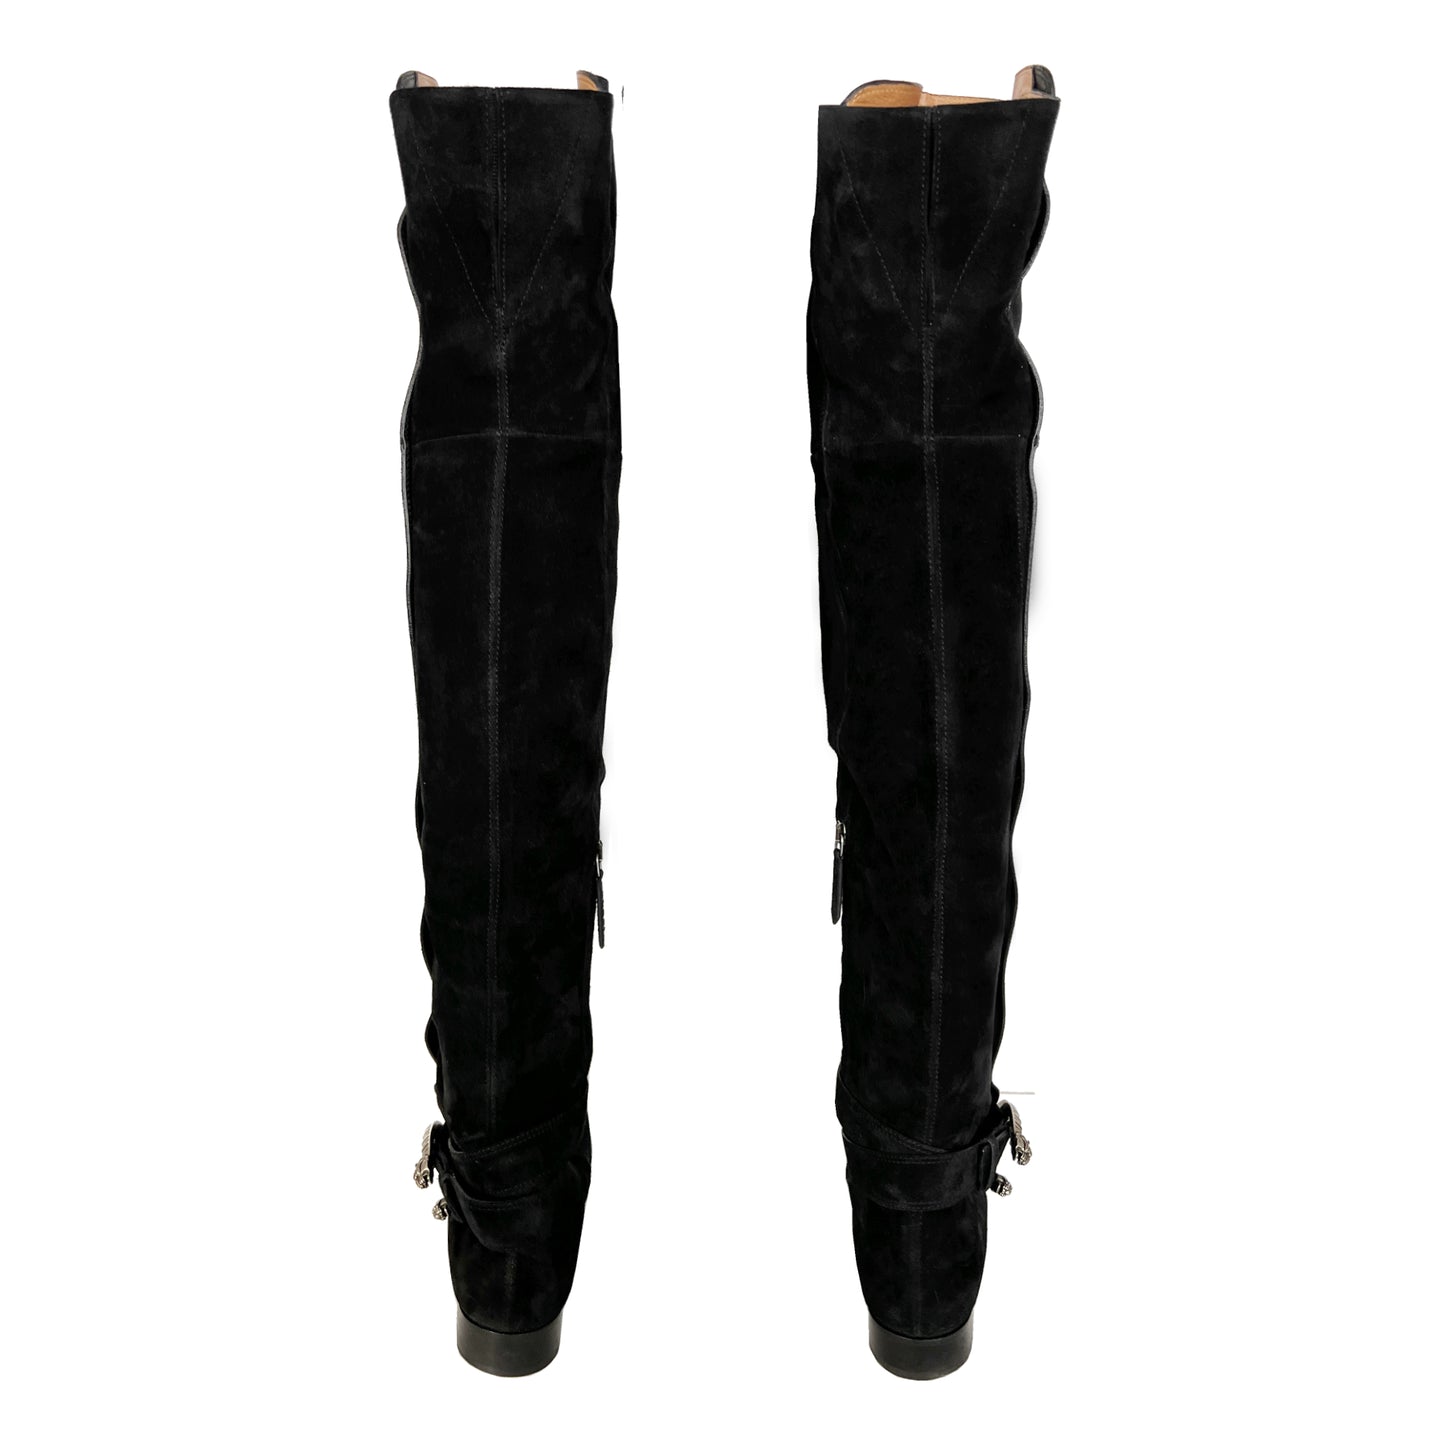 Gucci Dionysus Black Suede Over The Knee Boots Size EU 40